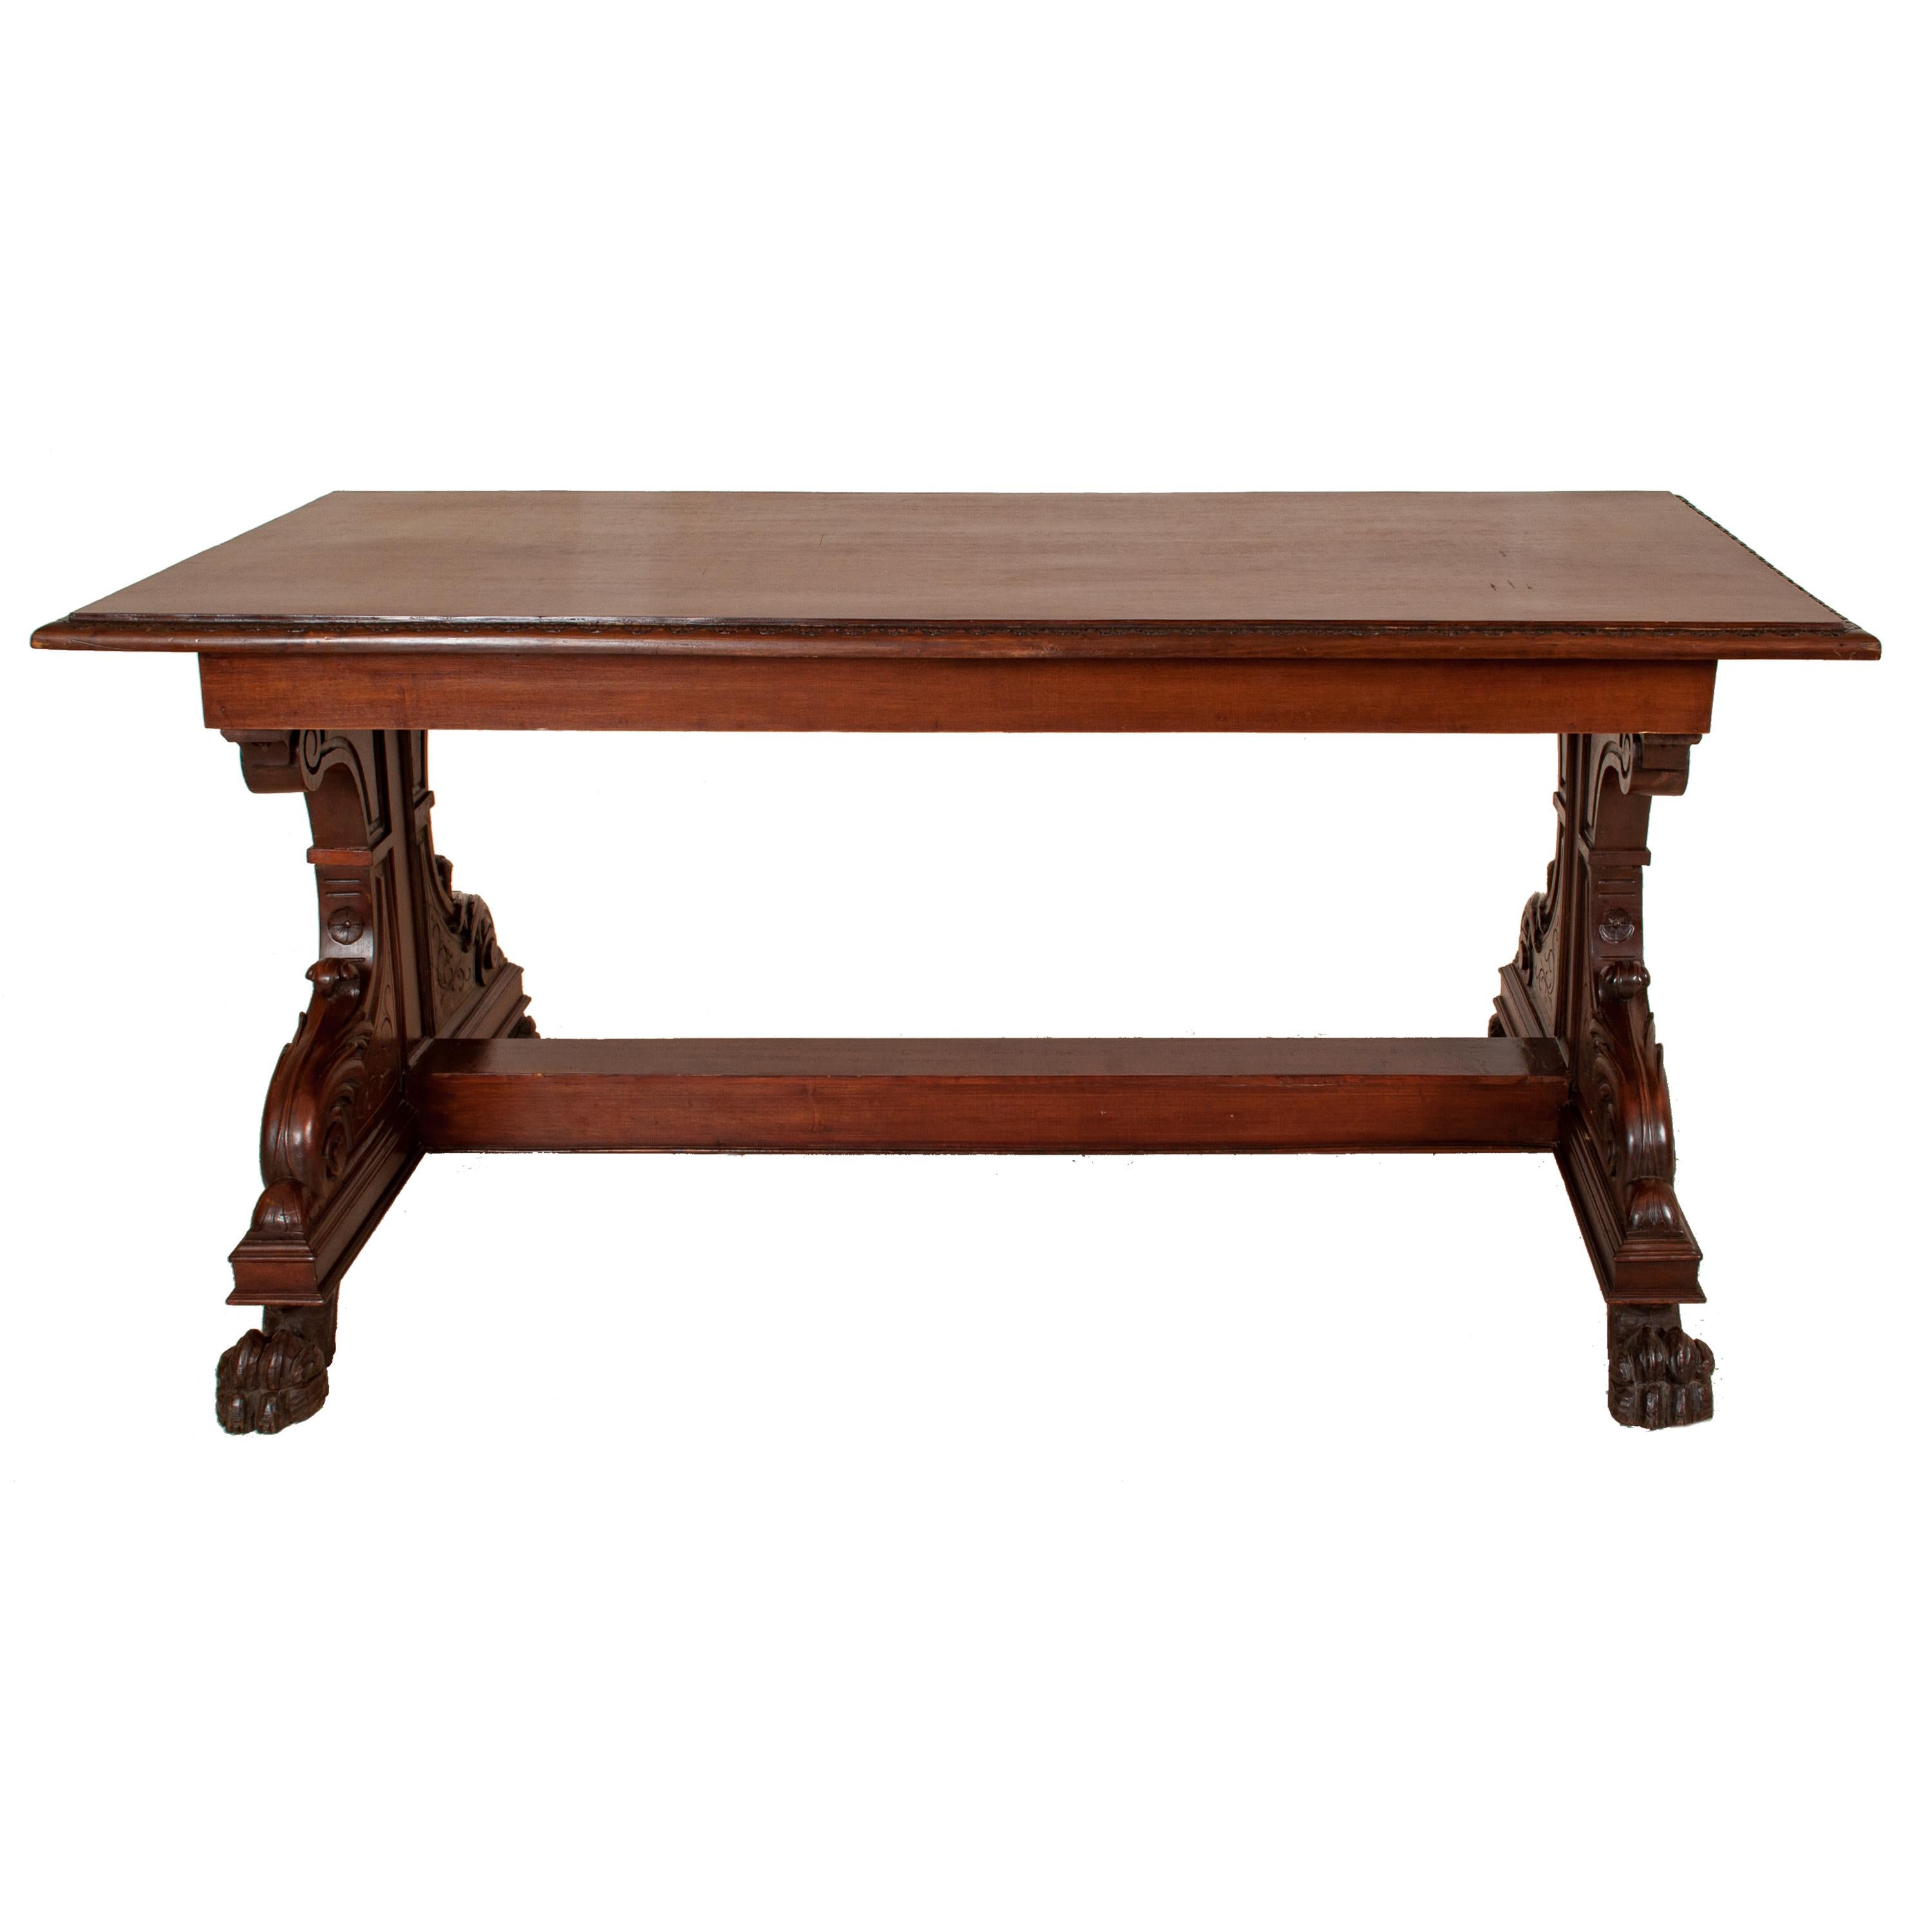 A very good antique Italian, Renaissance Revival carved walnut library/serving table, circa 1870.
The table top having a carved gadrooned edge with substantial carved supports at each end, the ends having incised carved decoration and acanthus leaf